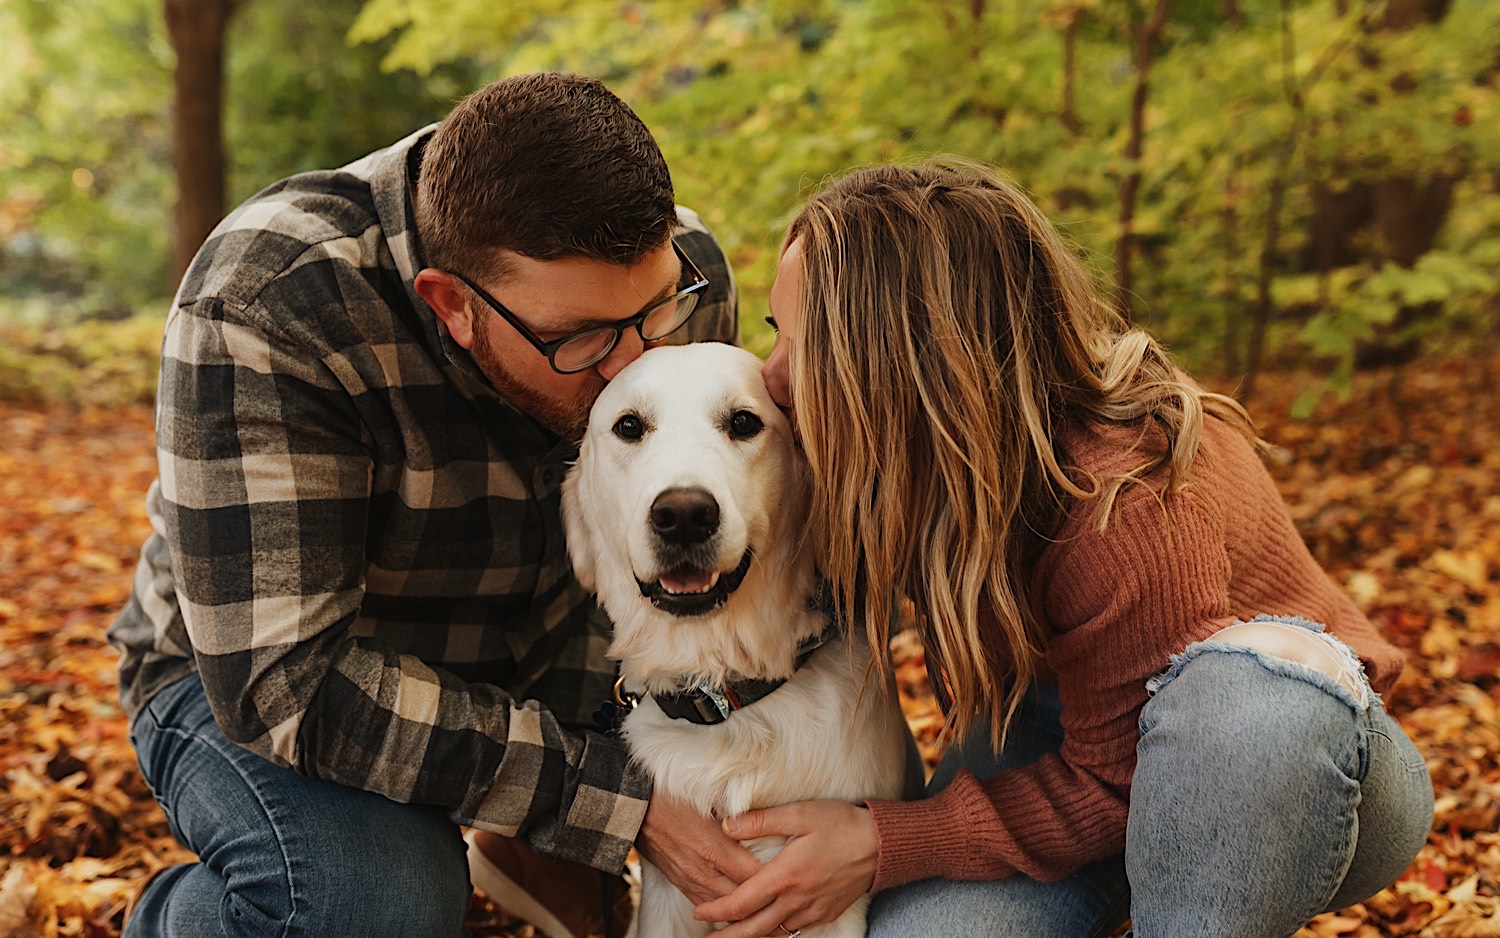 During their fall engagement session in Winona a couple squat down and kiss their dog who is sitting between them and is looking at the camera, the ground around them is covered in leaves